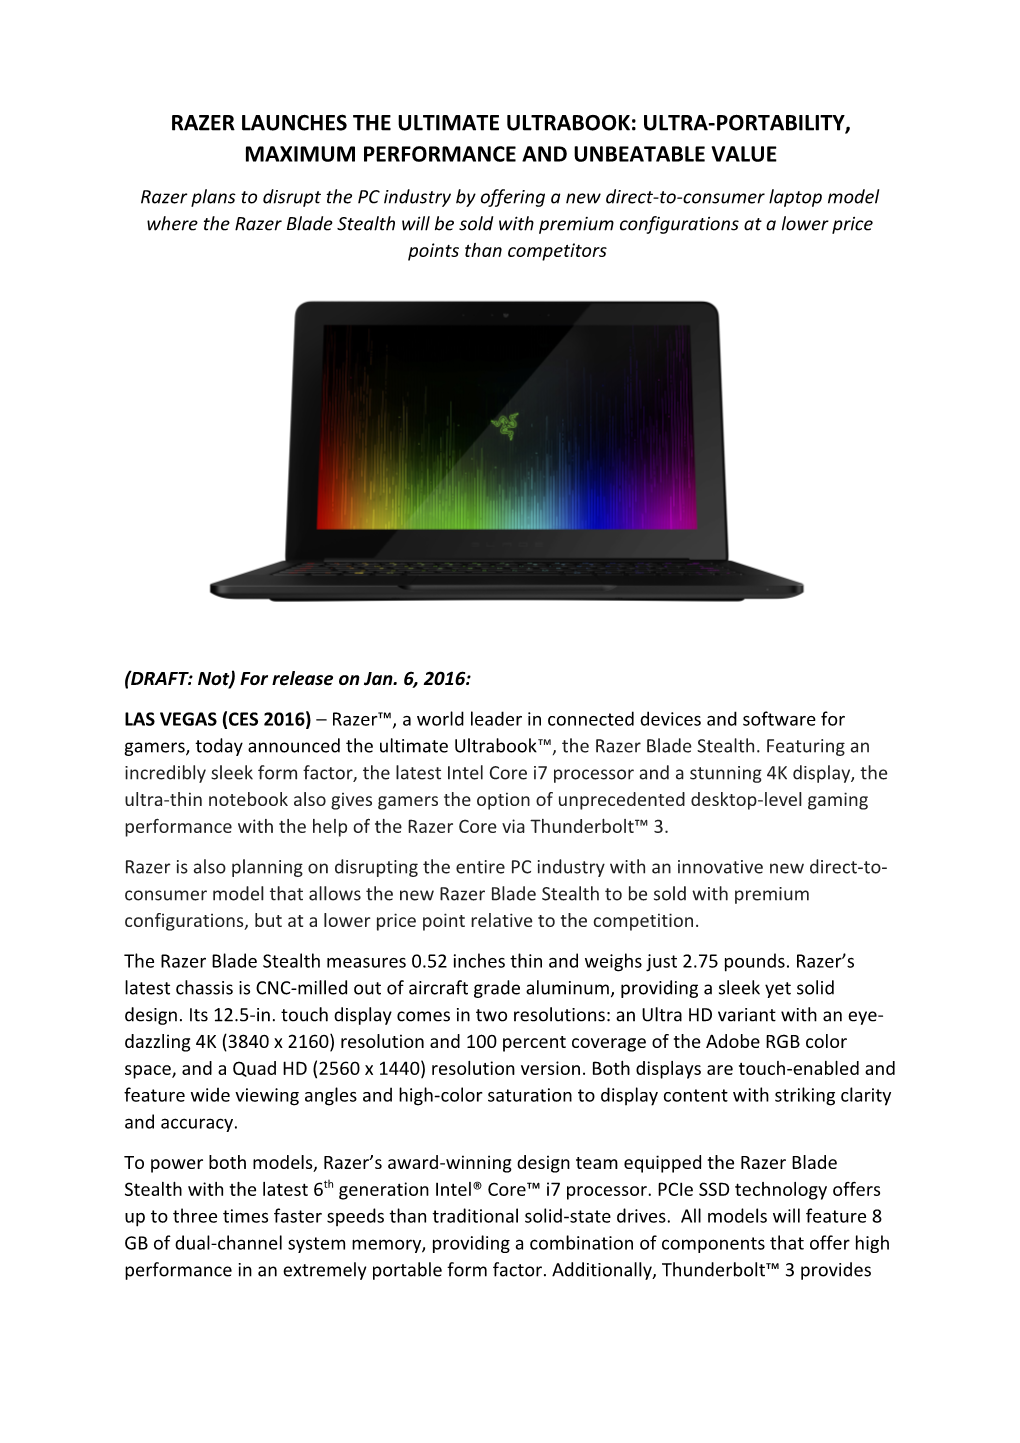 Razer Launches the Ultimate Ultrabook: Ultra-Portability, Maximum Performance and Unbeatable